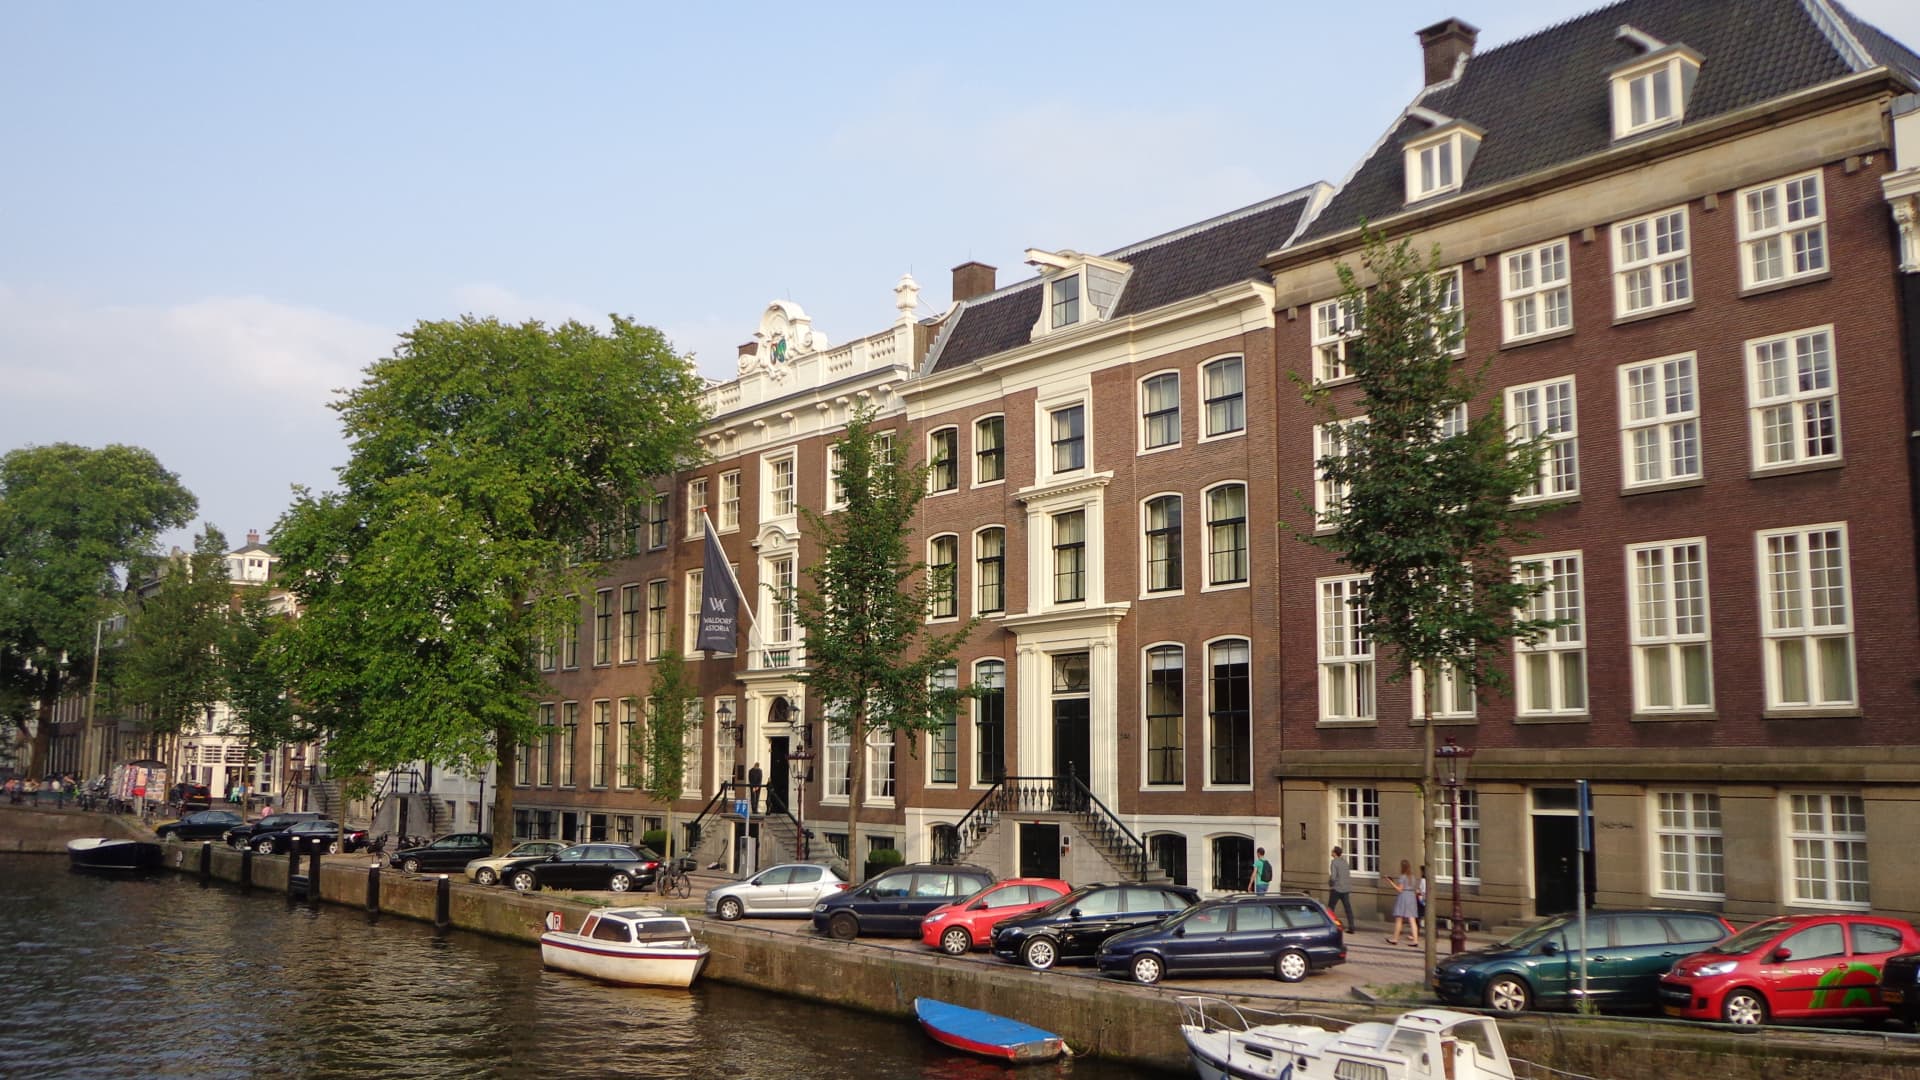 The Waldorf Astoria Hotel in Amsterdam, comprises six connecting houses beside the Herengracht Canal.